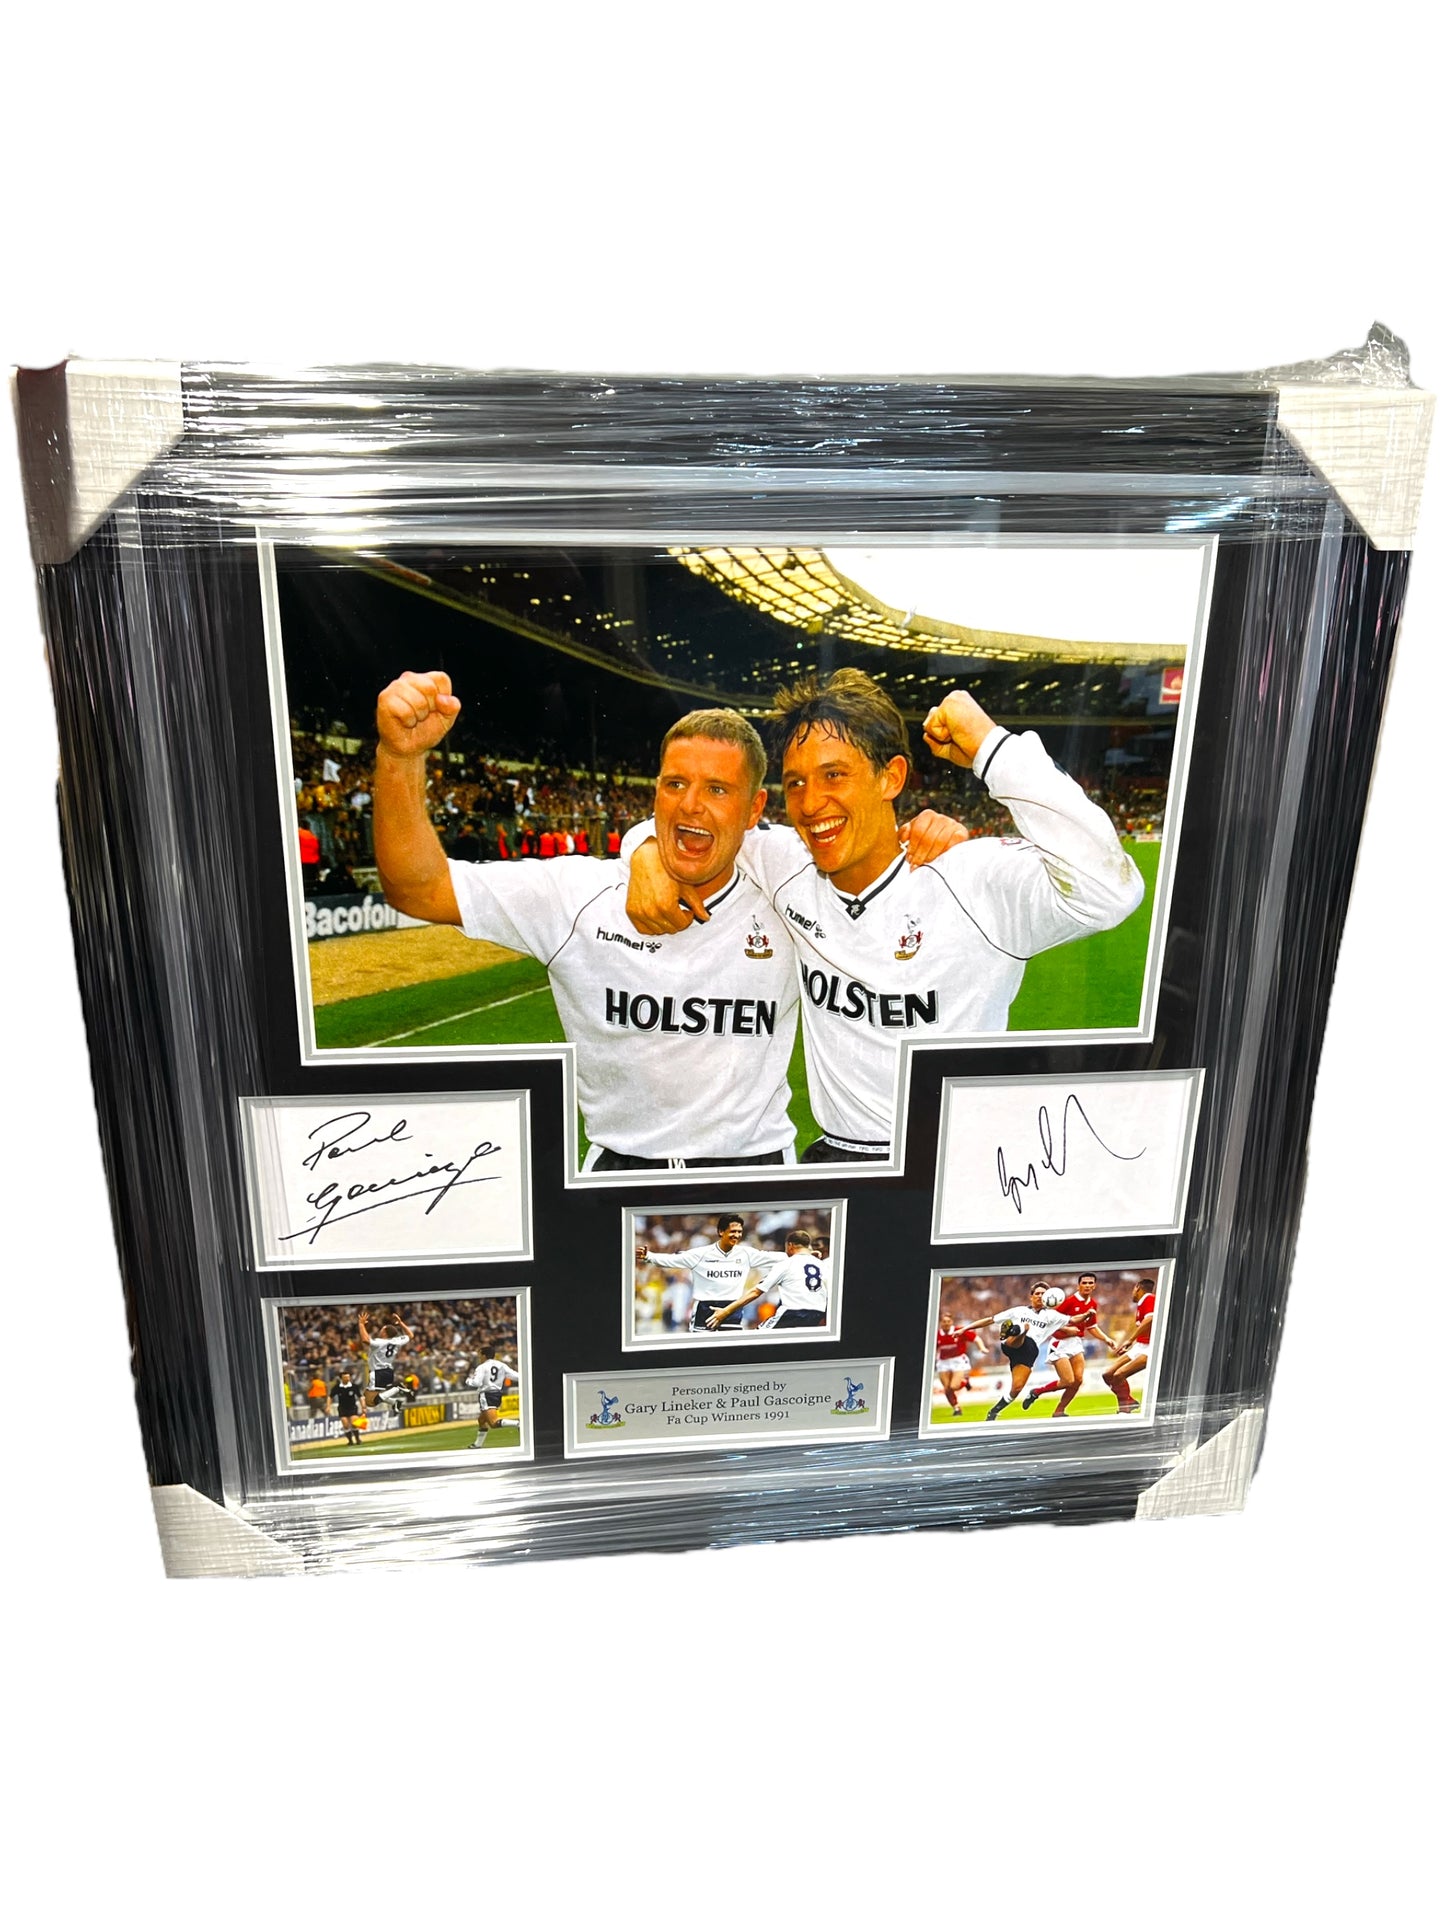 Tottenham Hotspur 1991 FA Cup Winners Framed- Duel Signed By Paul Gascoigne and Gary Lineker